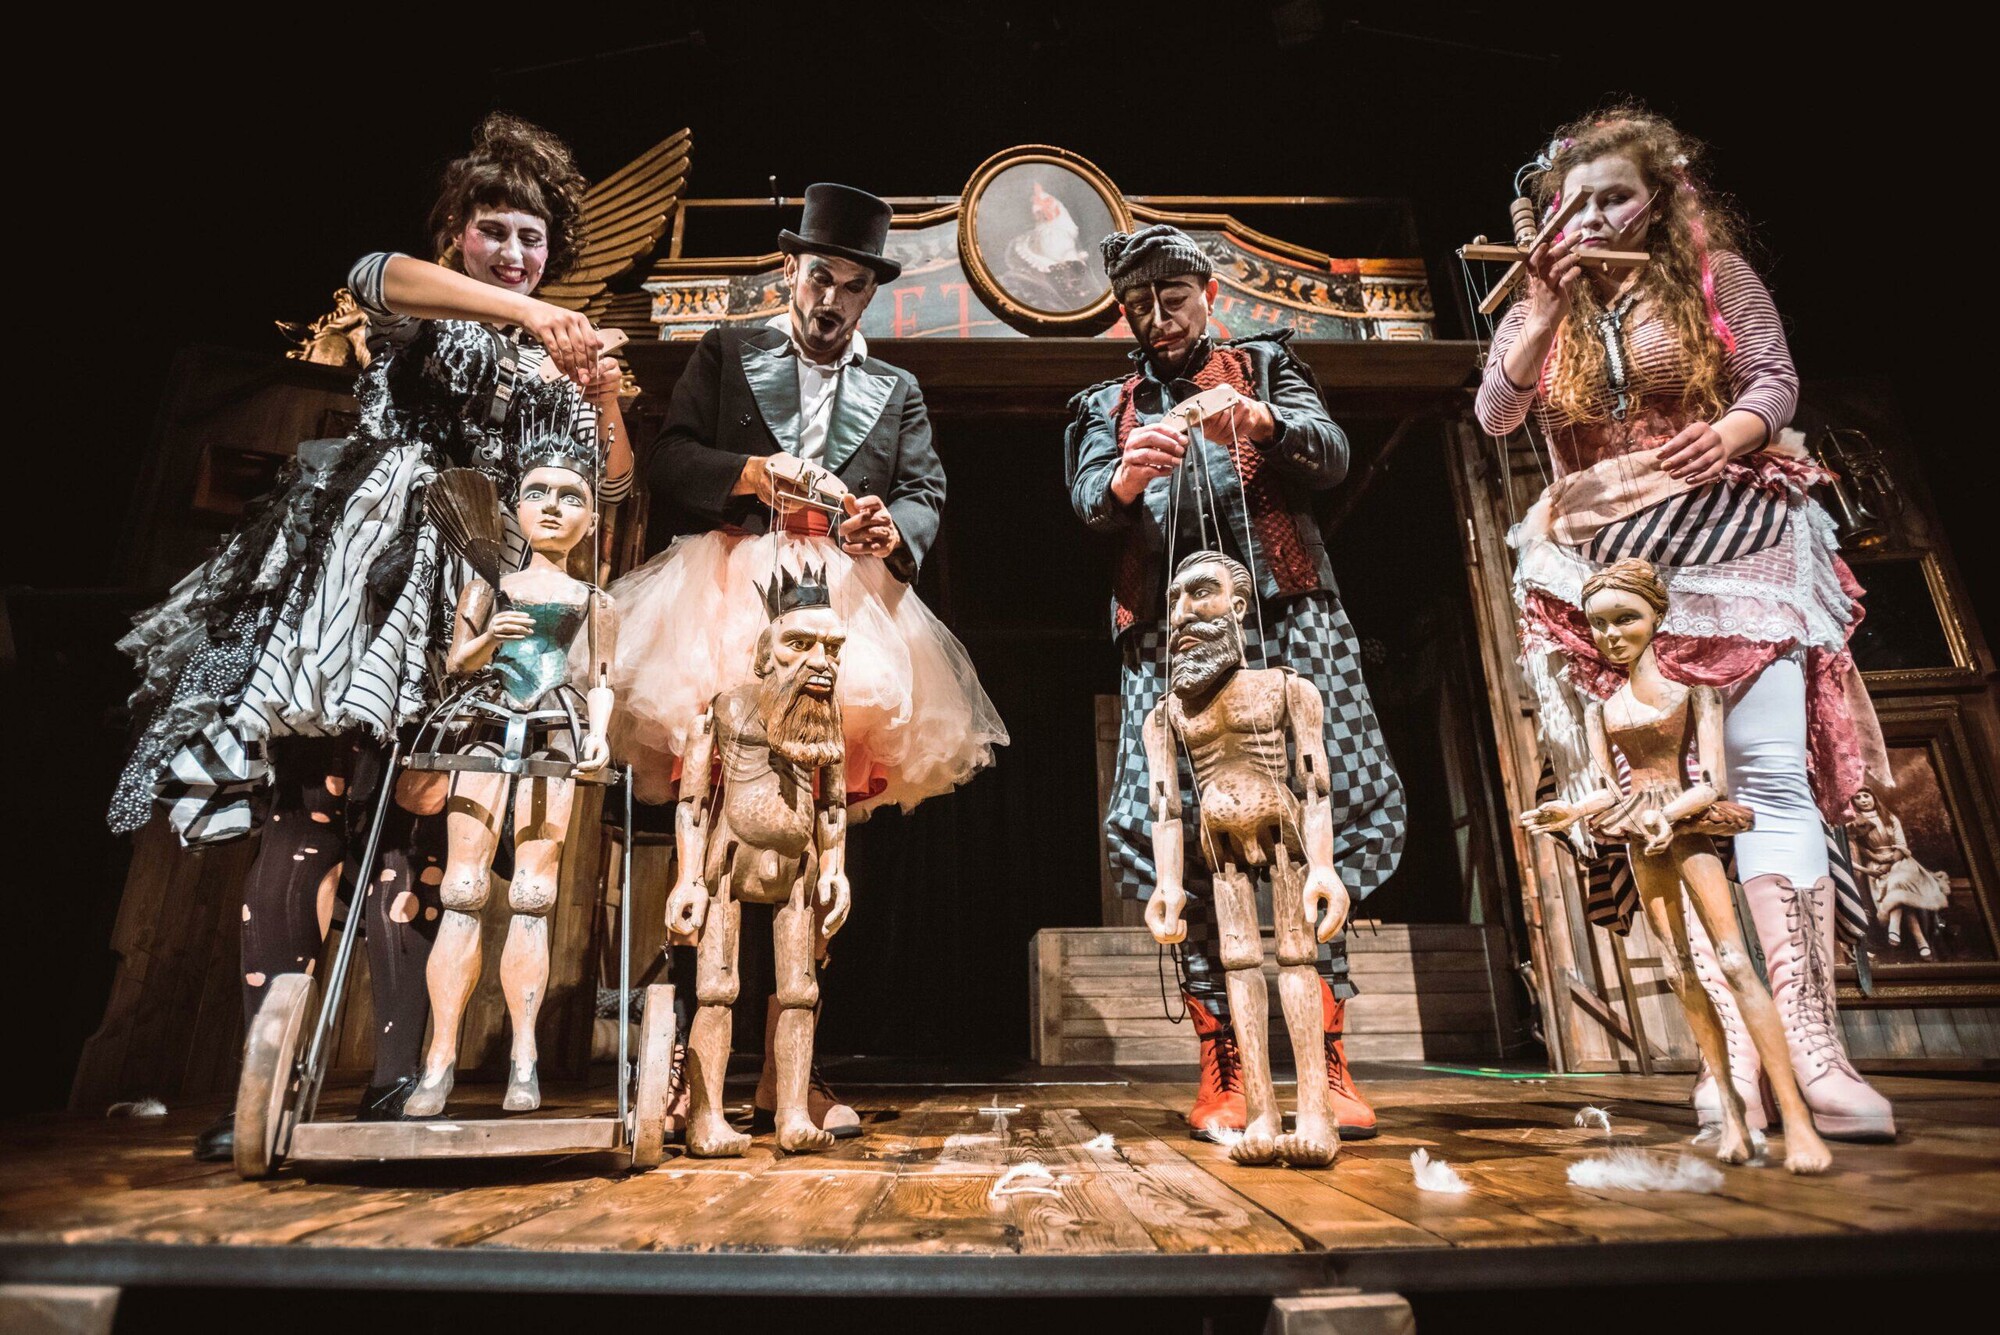 Four actors in full costume controlling puppets on stage.